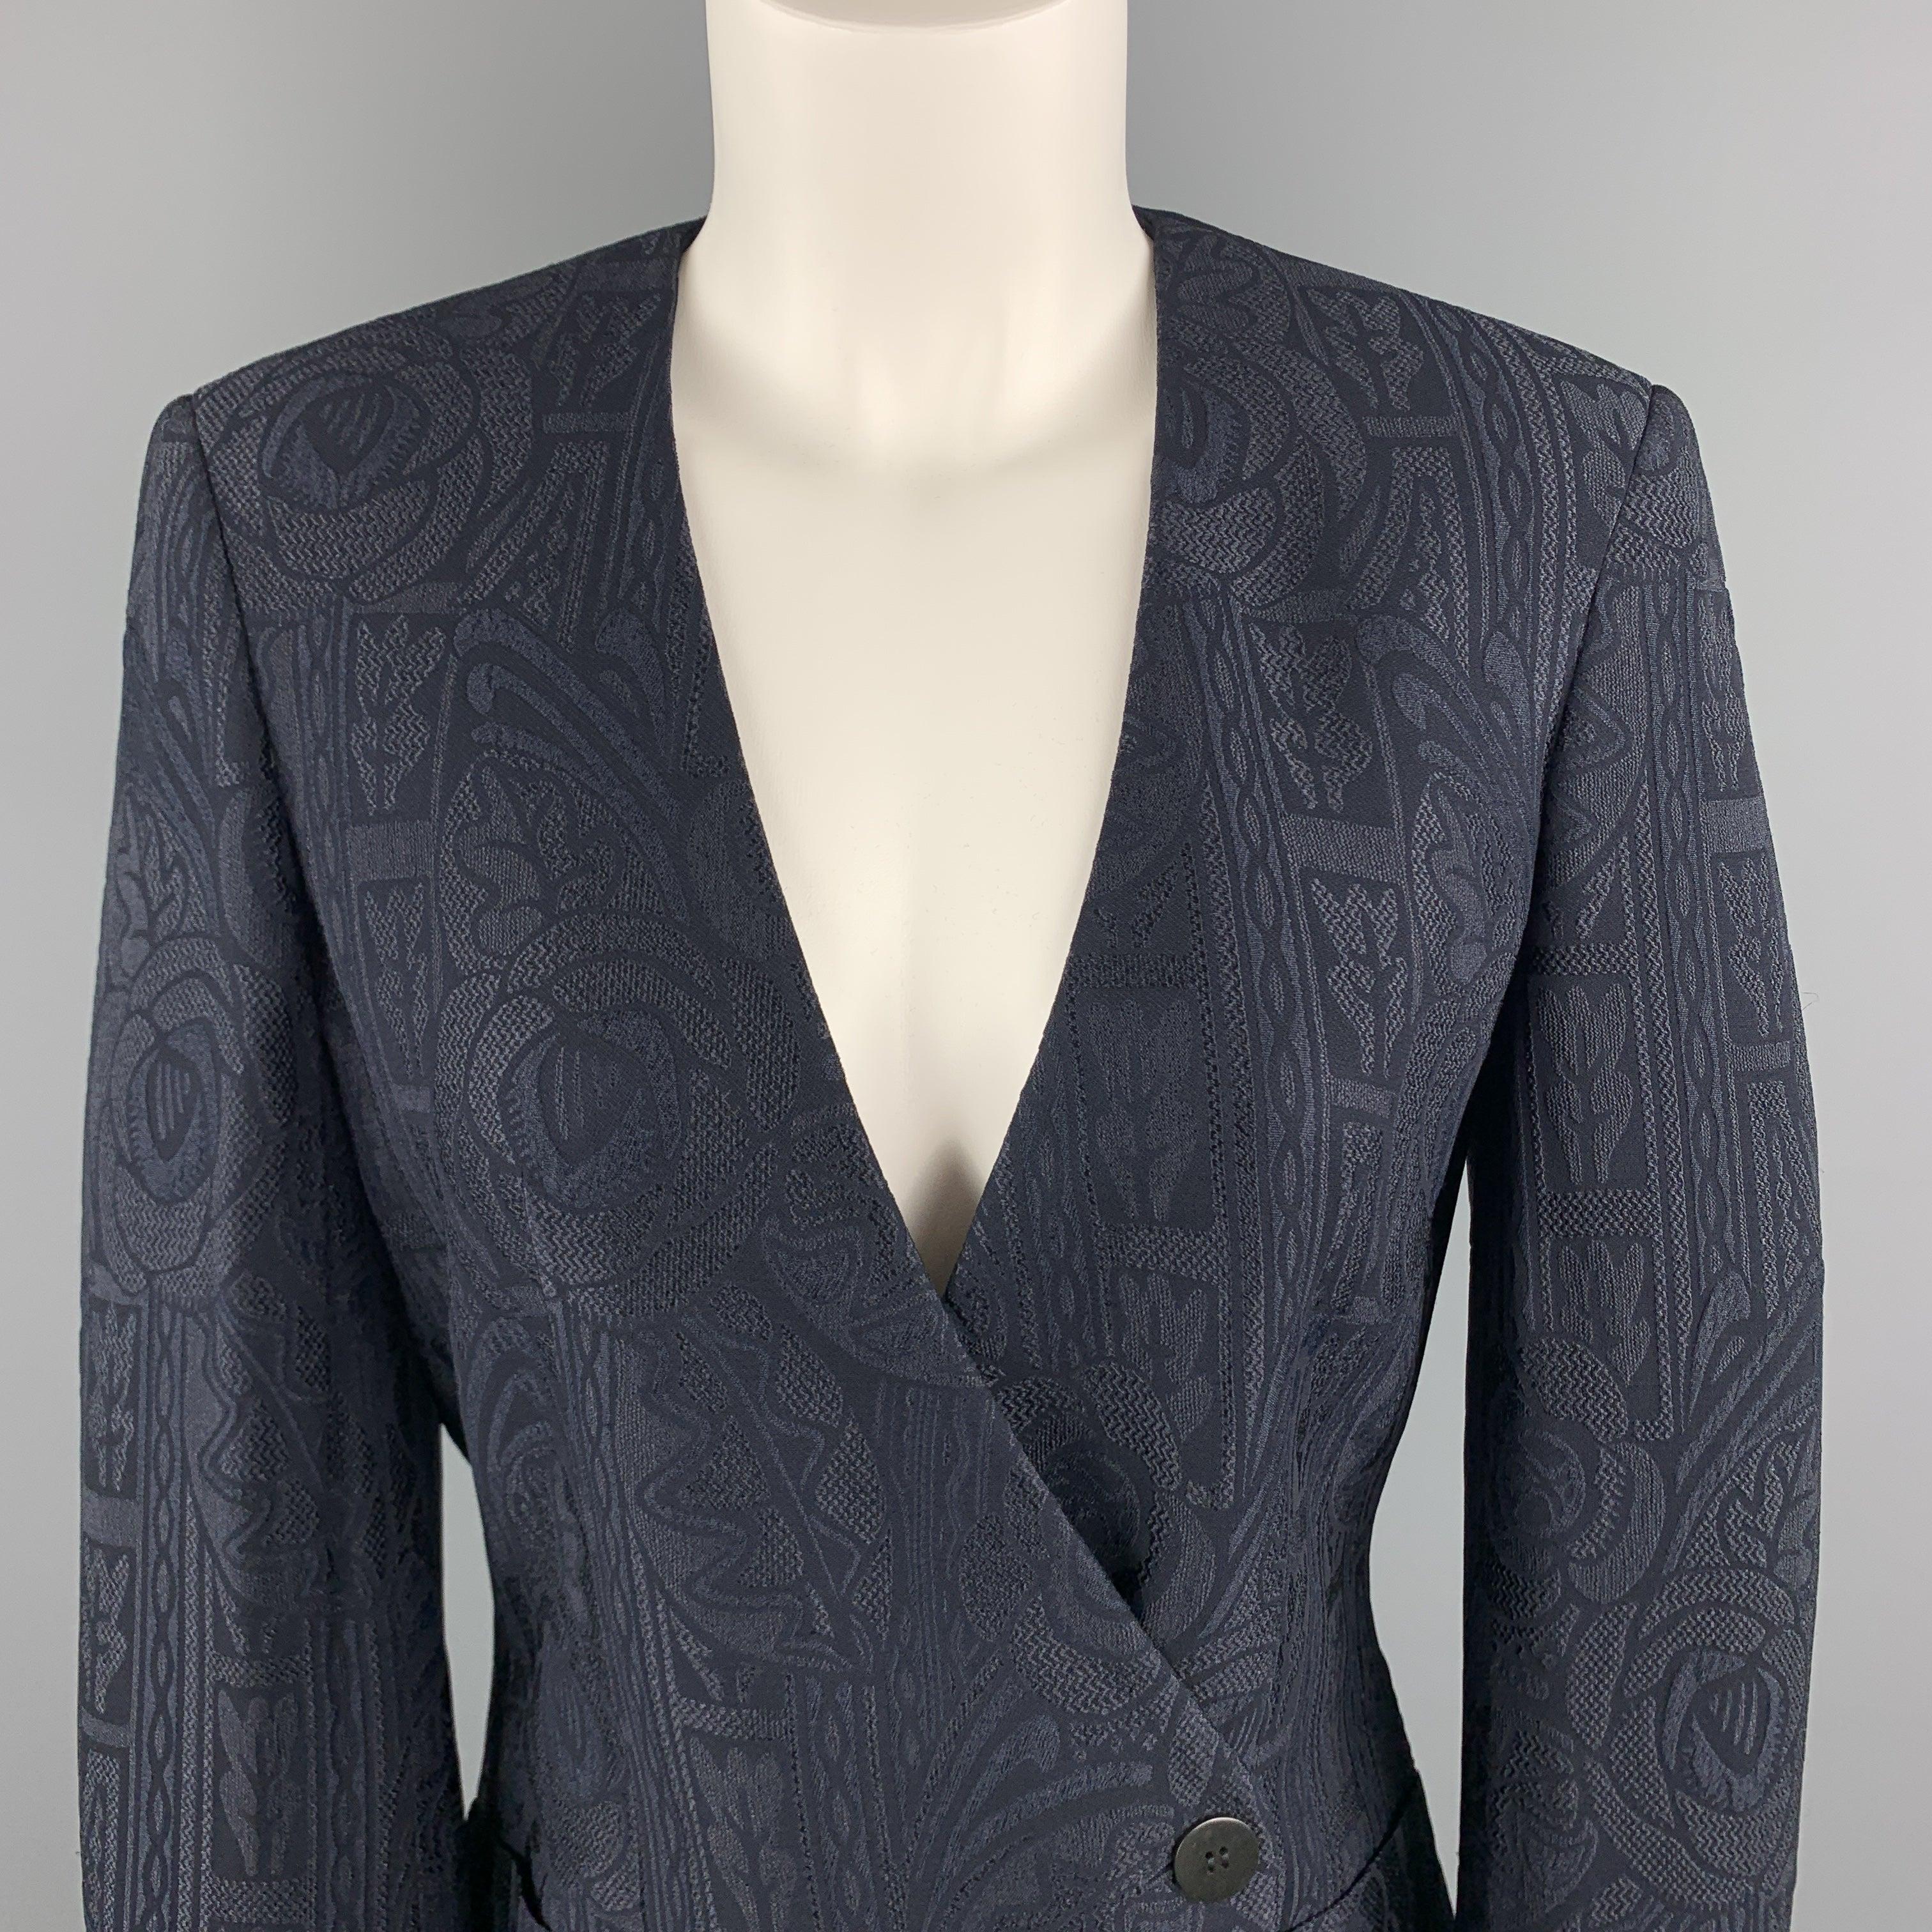 GIORGIO ARMANI blazer comes in navy jacquard with a deep V neck, double breasted button front, and mock pockets. Made in Italy.Excellent
Pre-Owned Condition. 

Marked:   IT 36 

Measurements: 
 
Shoulder: 15.5 inches Bust:
34 inches Sleeve:
23.5